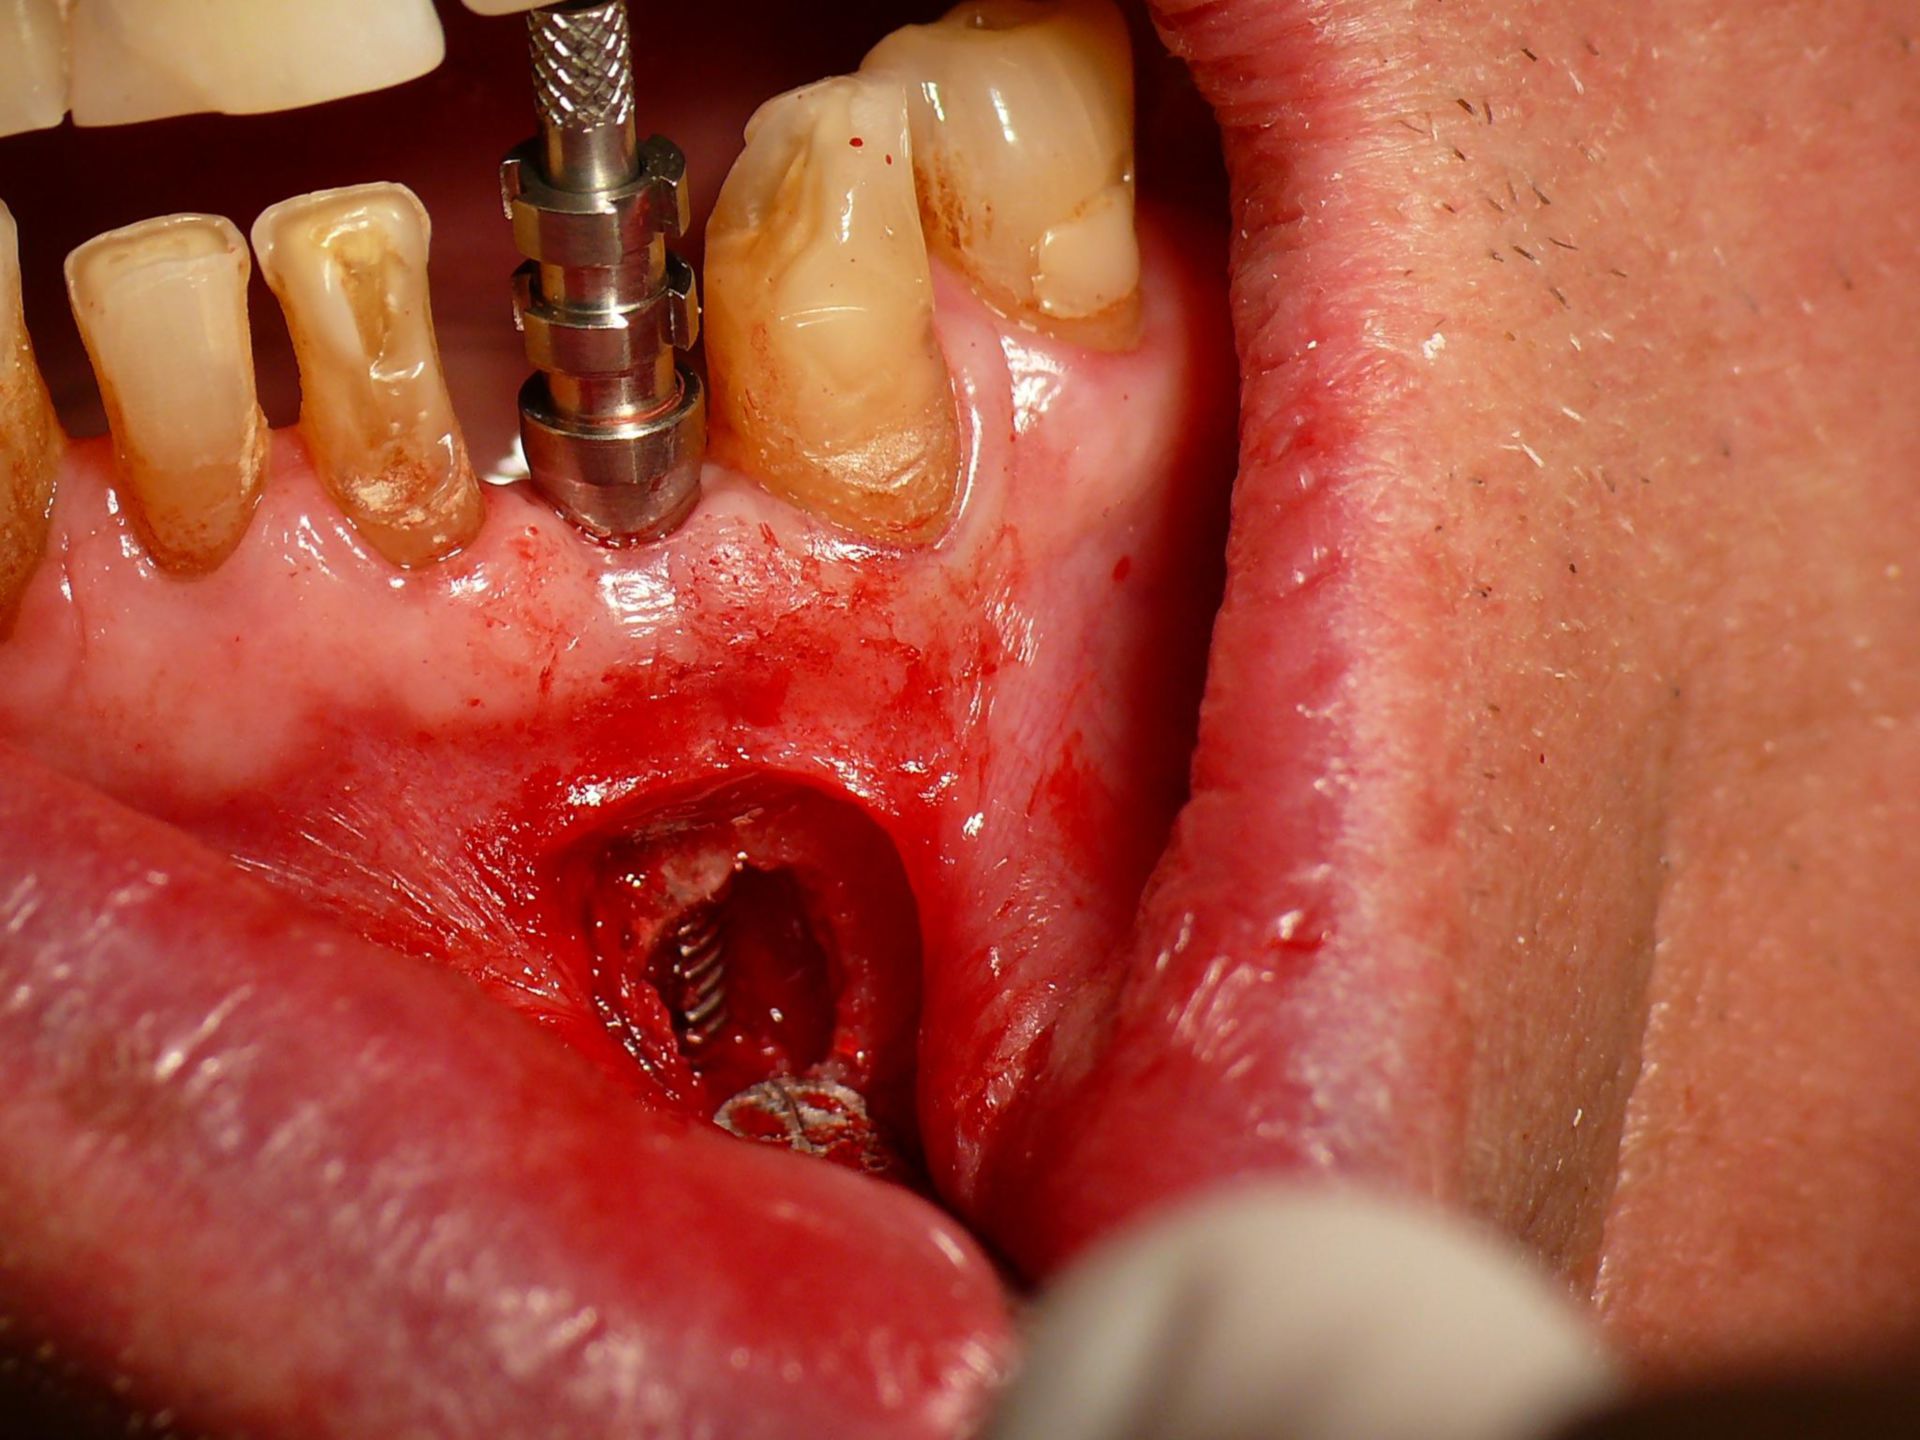 Fenestration of an implant in the jaw